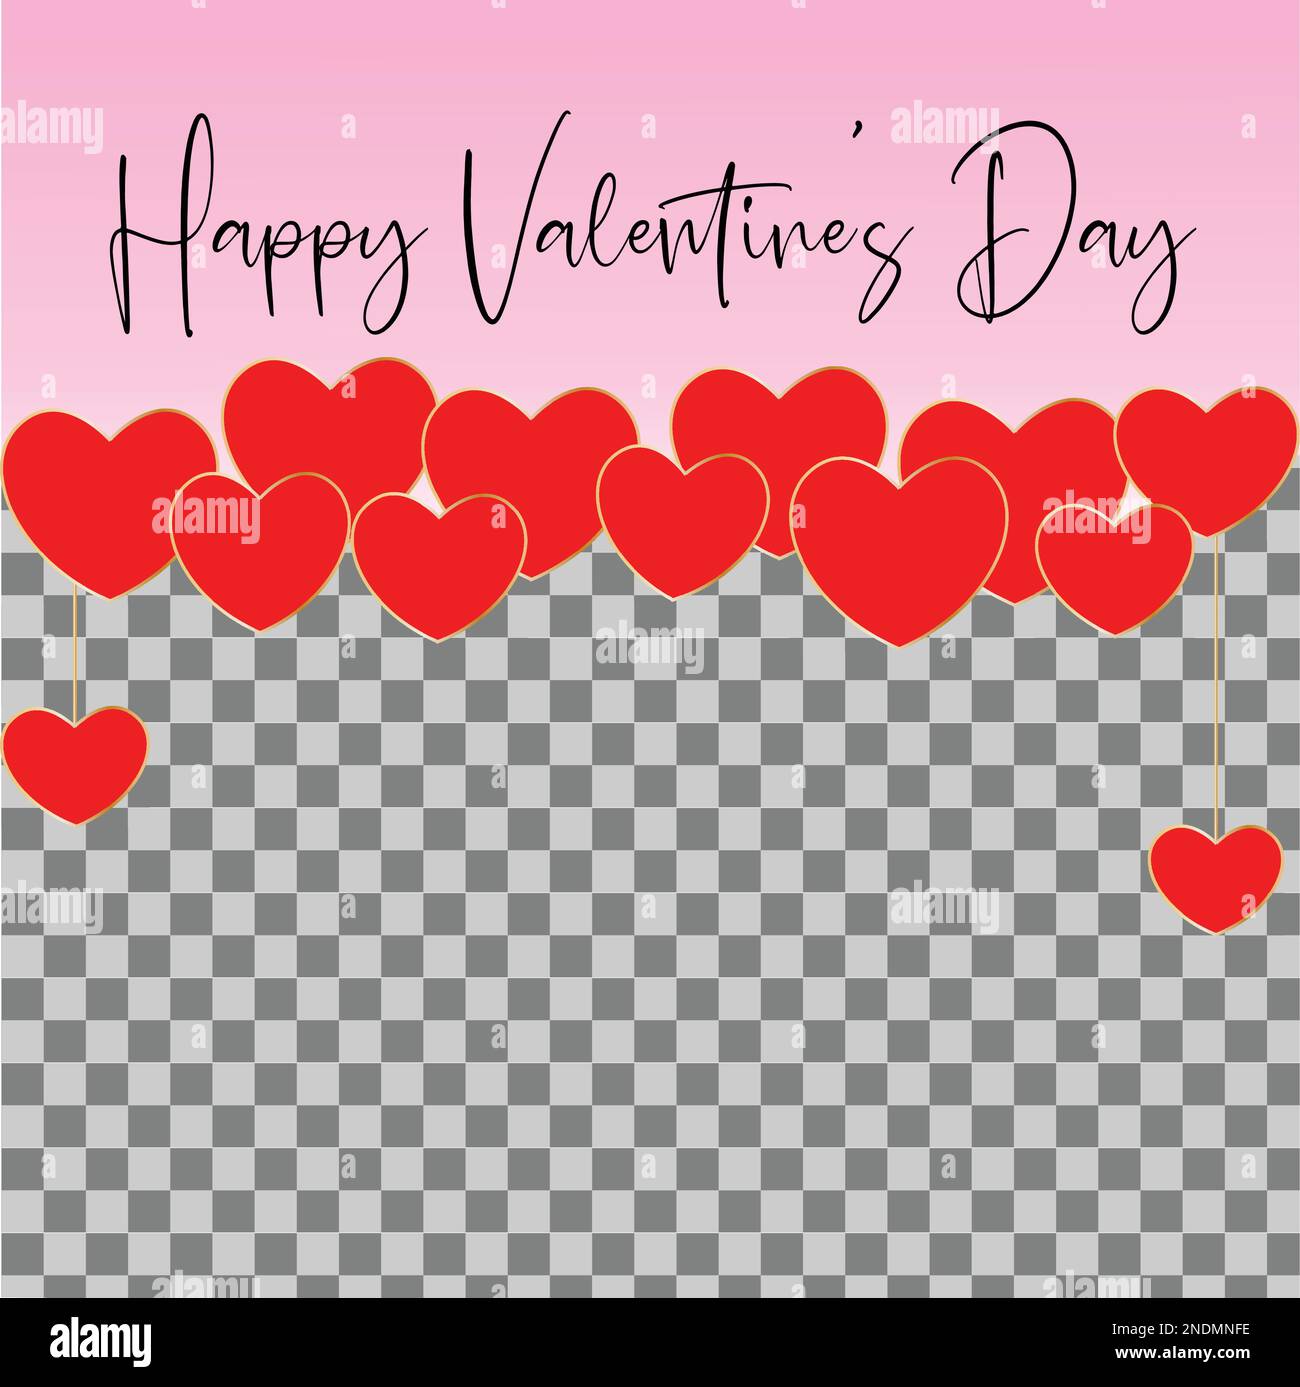 Lettering Happy Valentines Day banner. Valentines Day greeting